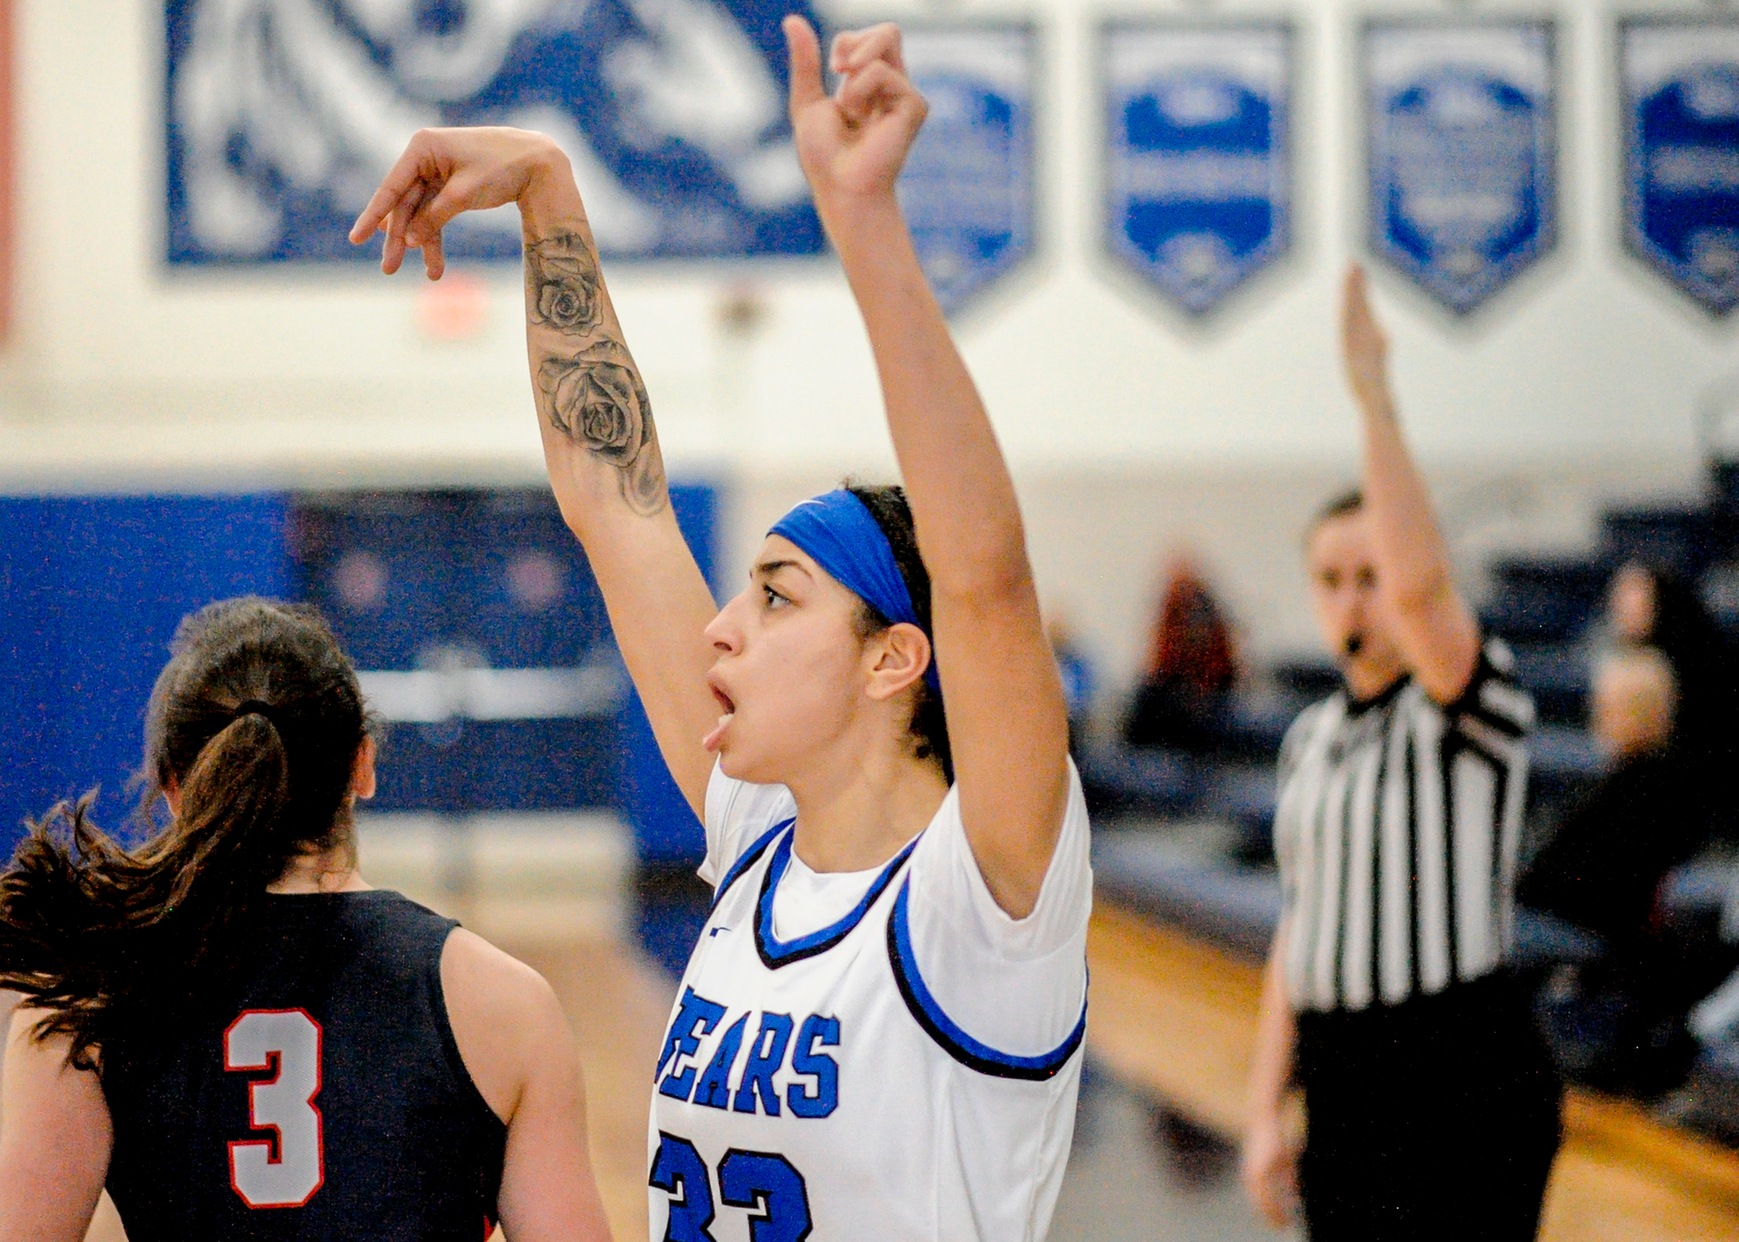 DMACC women's basketball team downed by ILCC, 55-42